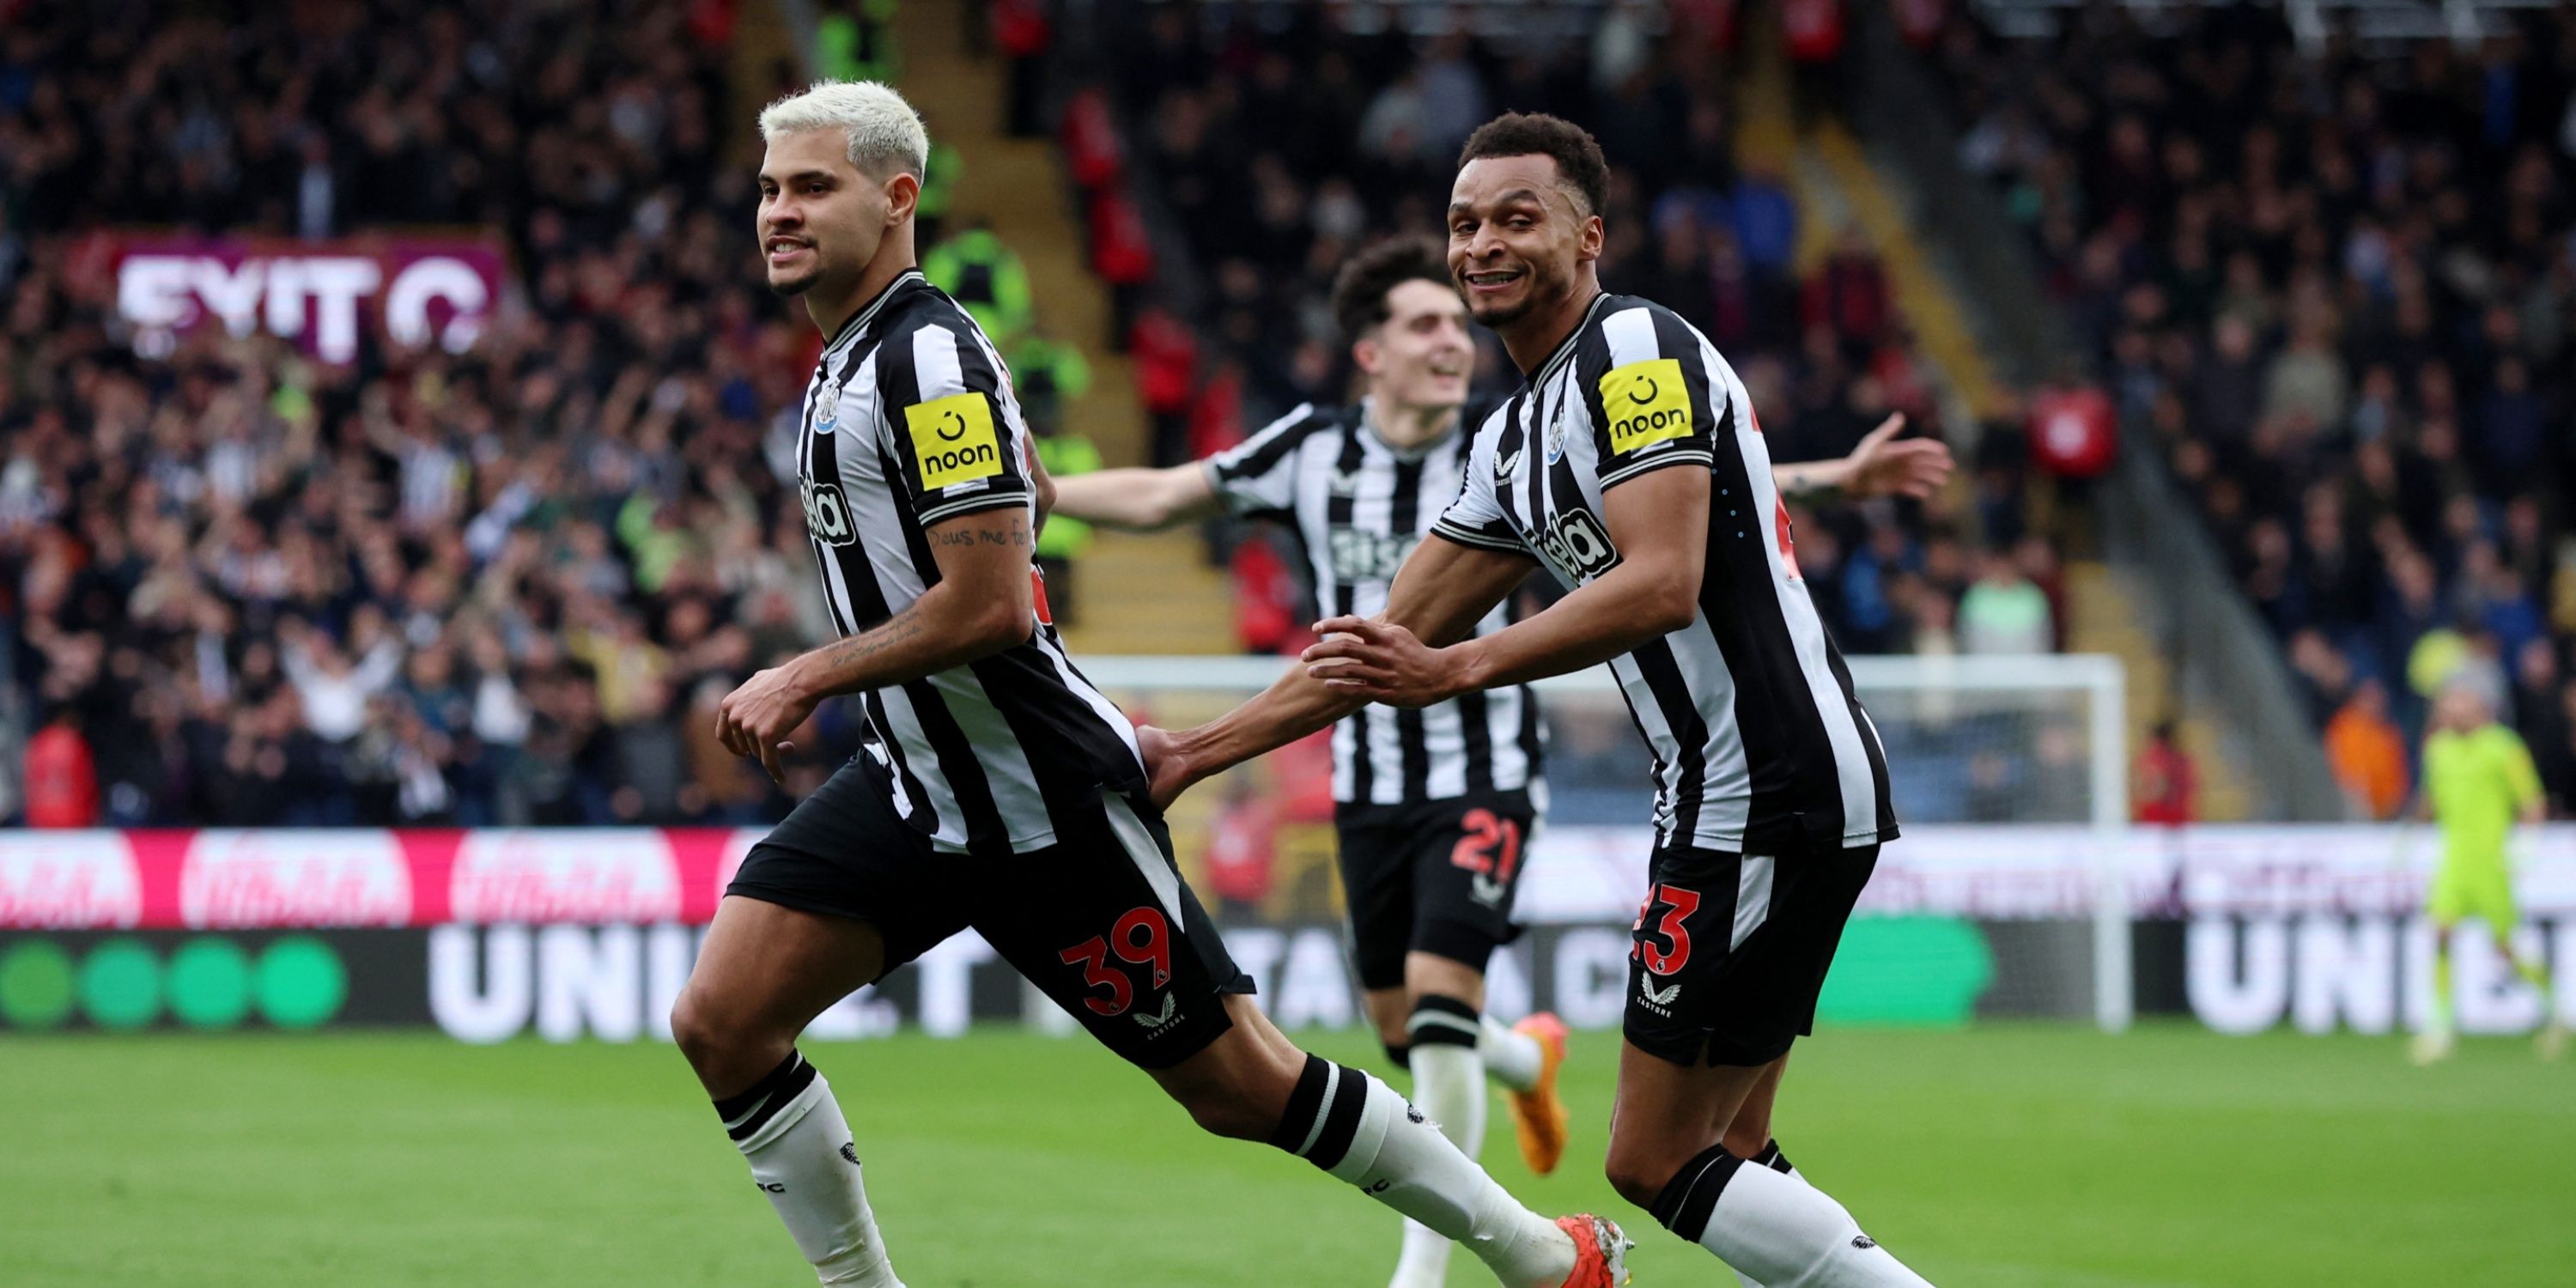 newcastle star now looks undroppable after 10/10 burnley display